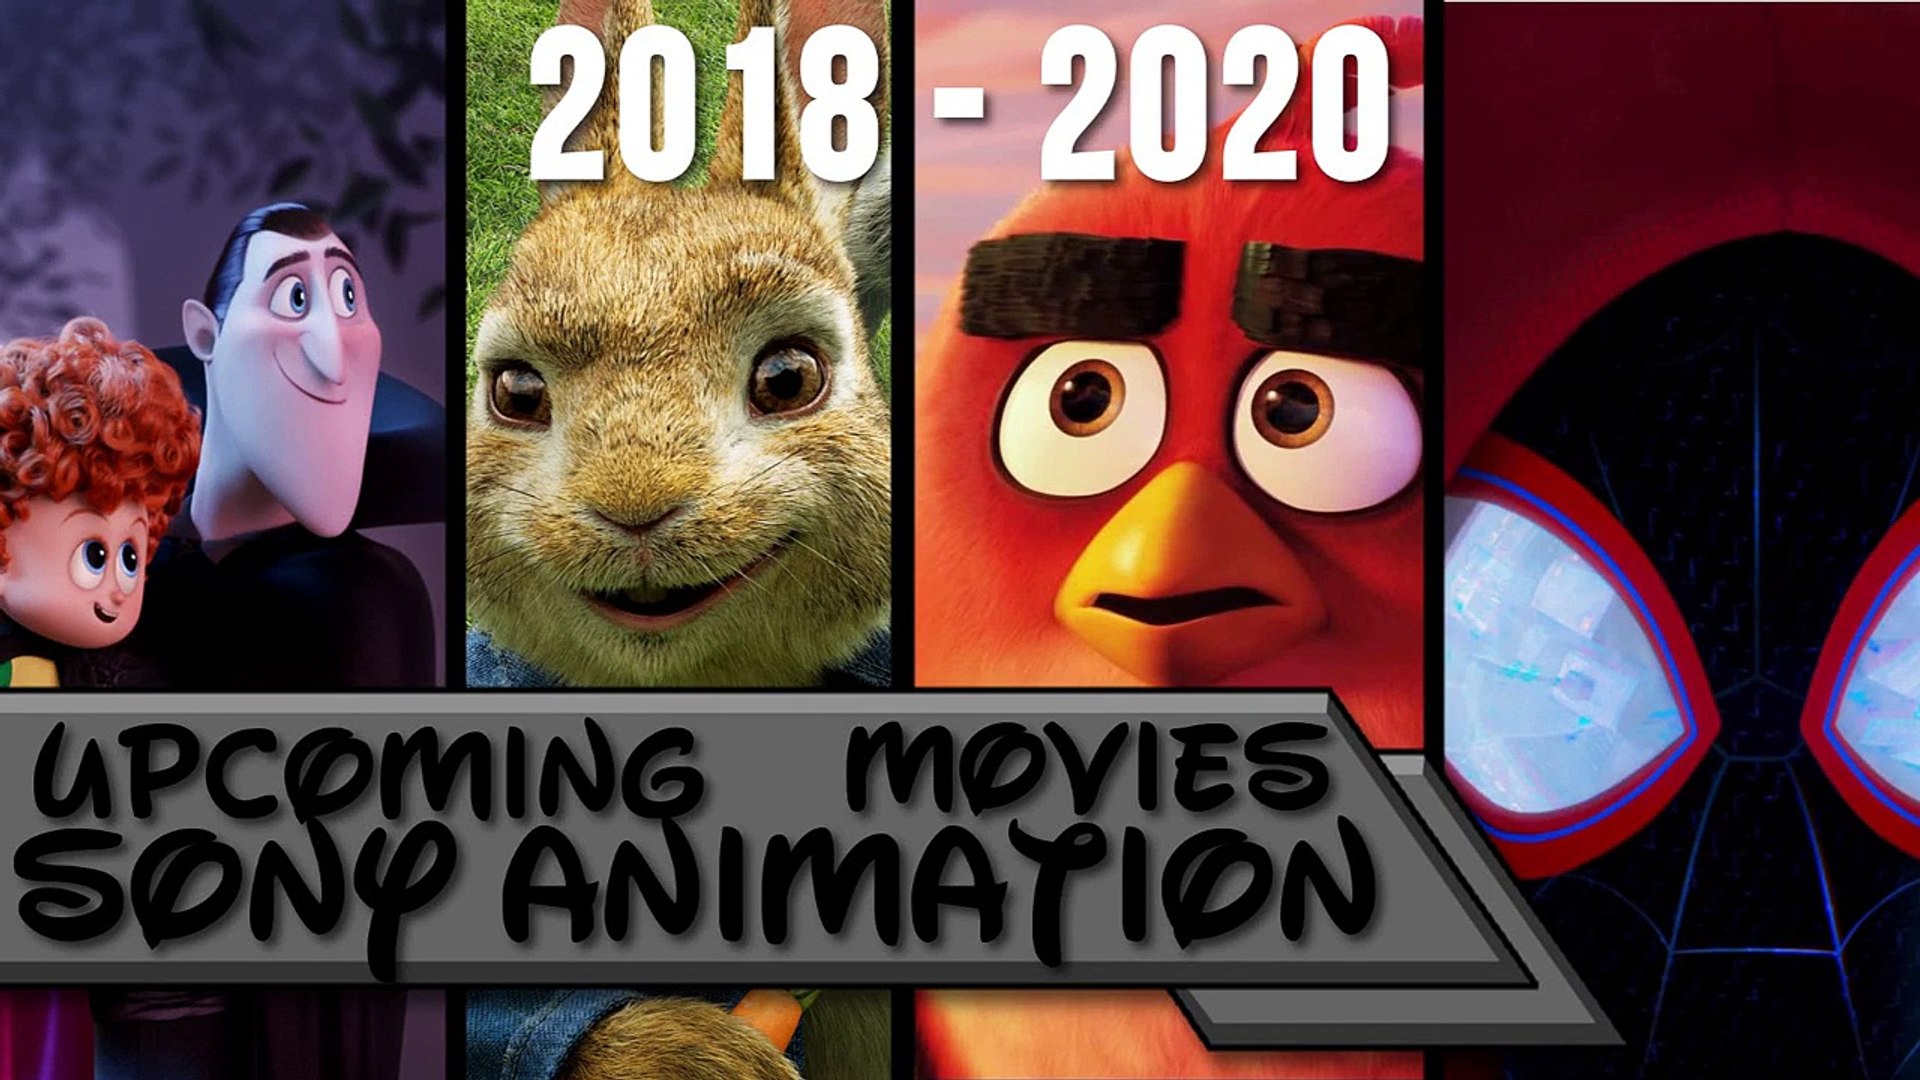 Upcoming Sony Animation Movies 2018-2020 - video Dailymotion